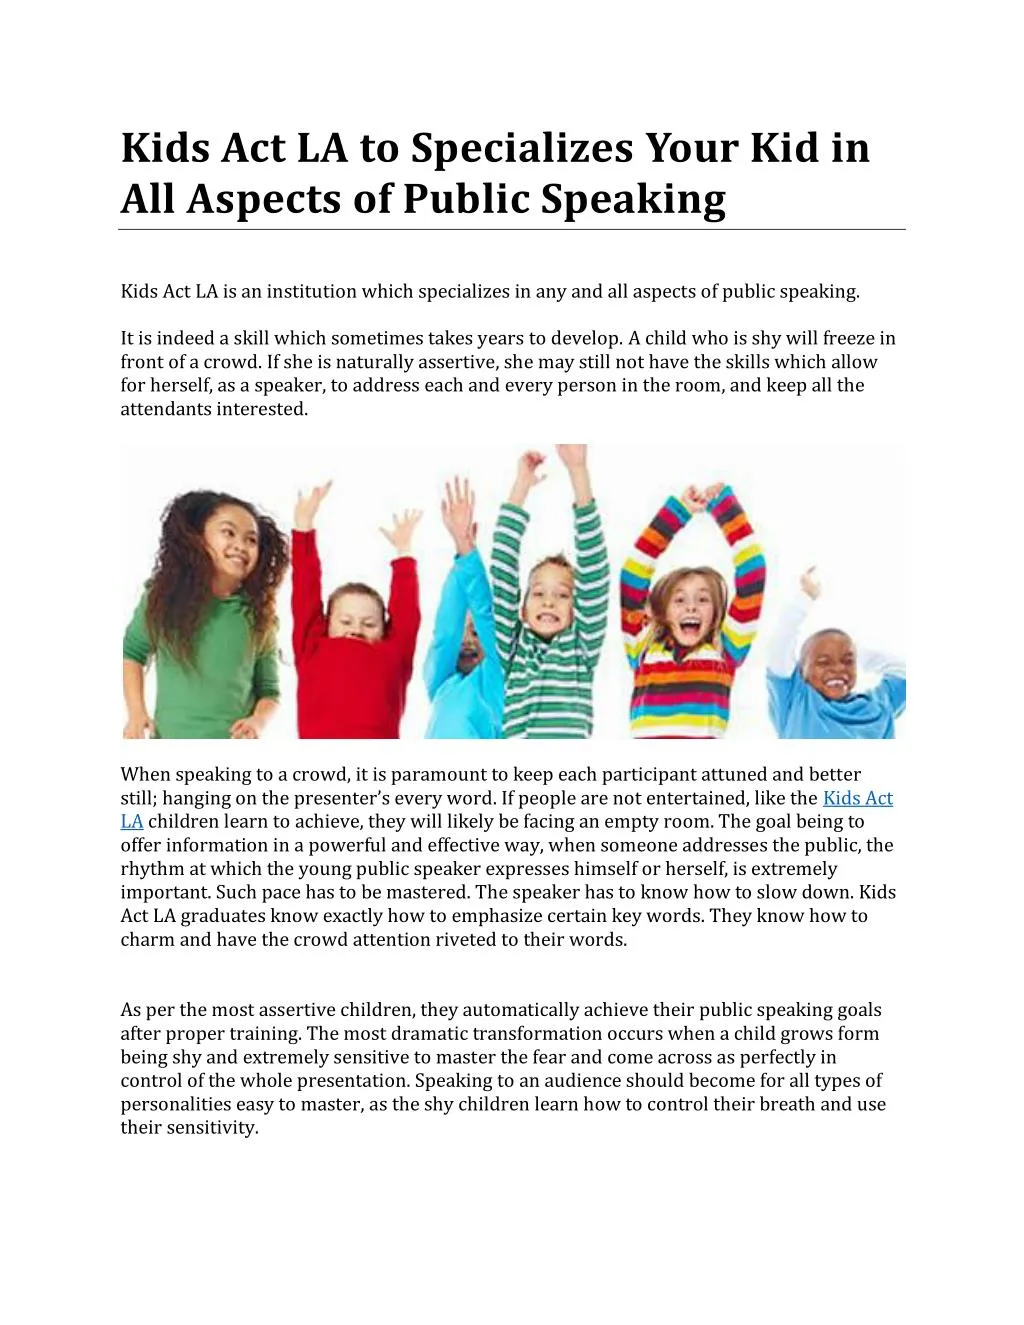 PPT - Kids Act LA to Specializes Your Kid in All Aspects ...